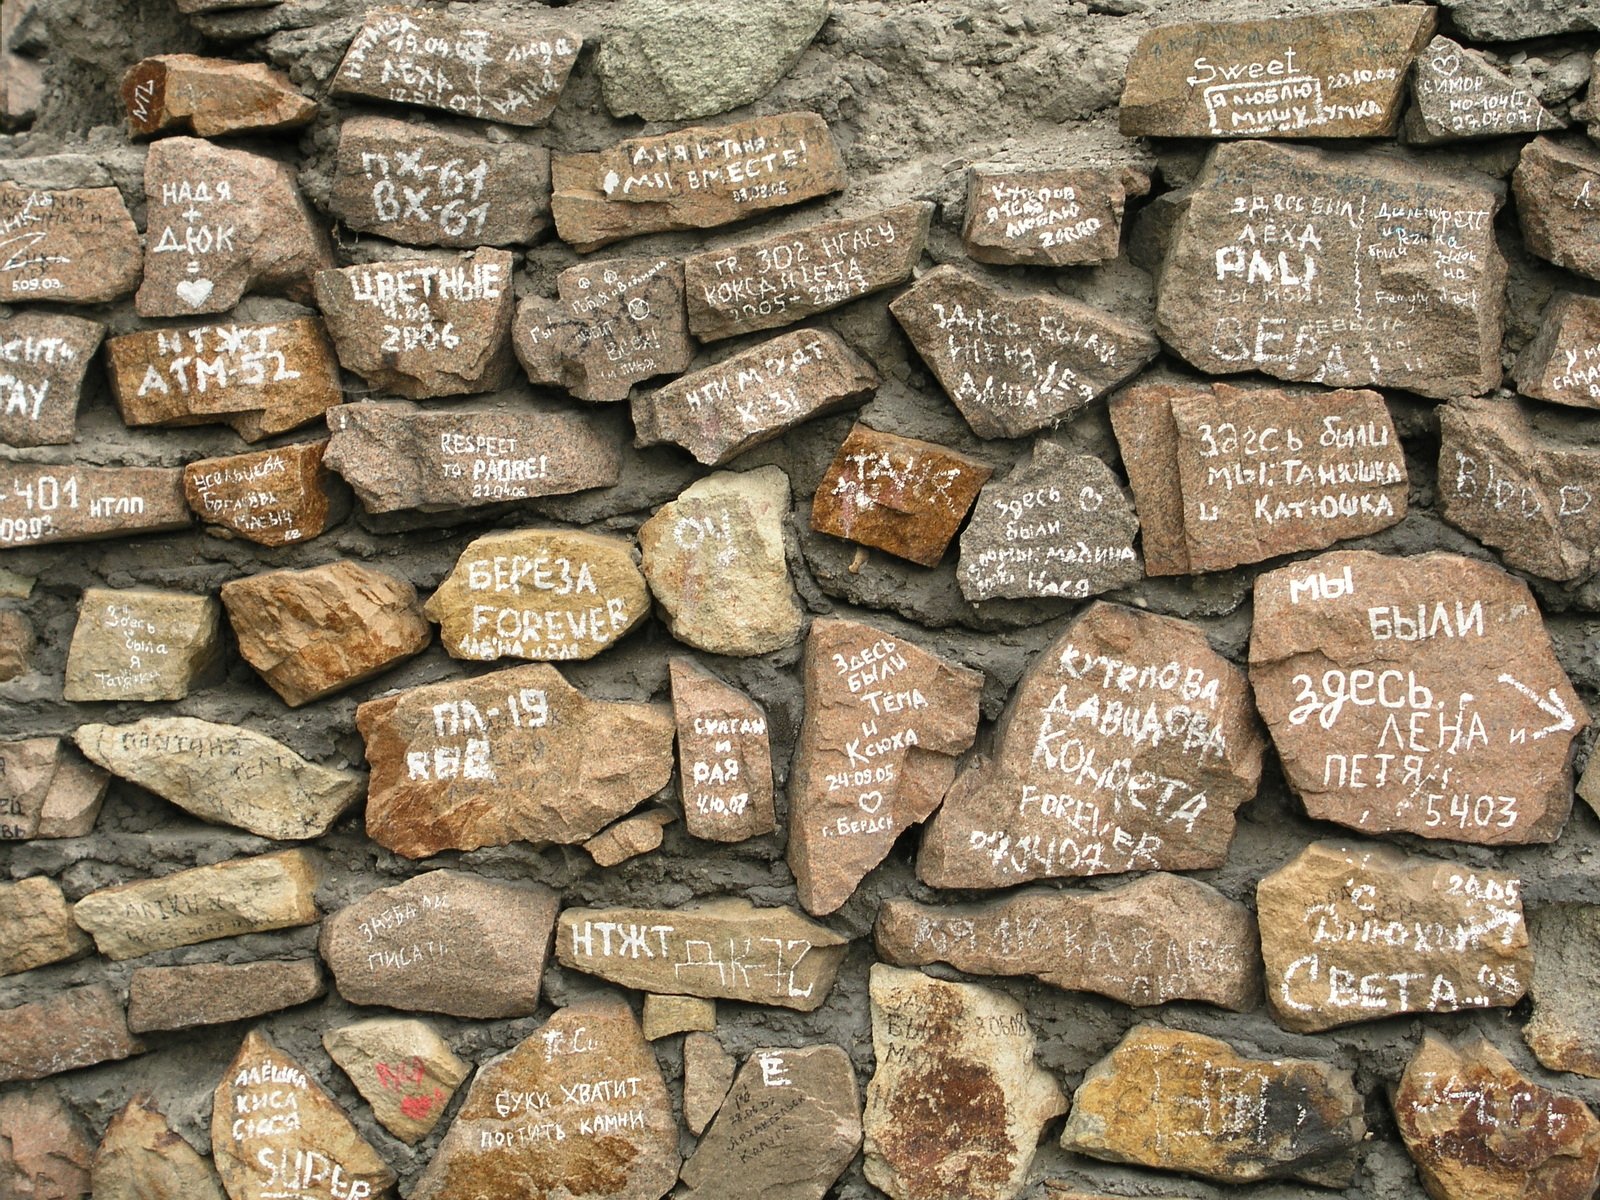 many different rock that has writing on them